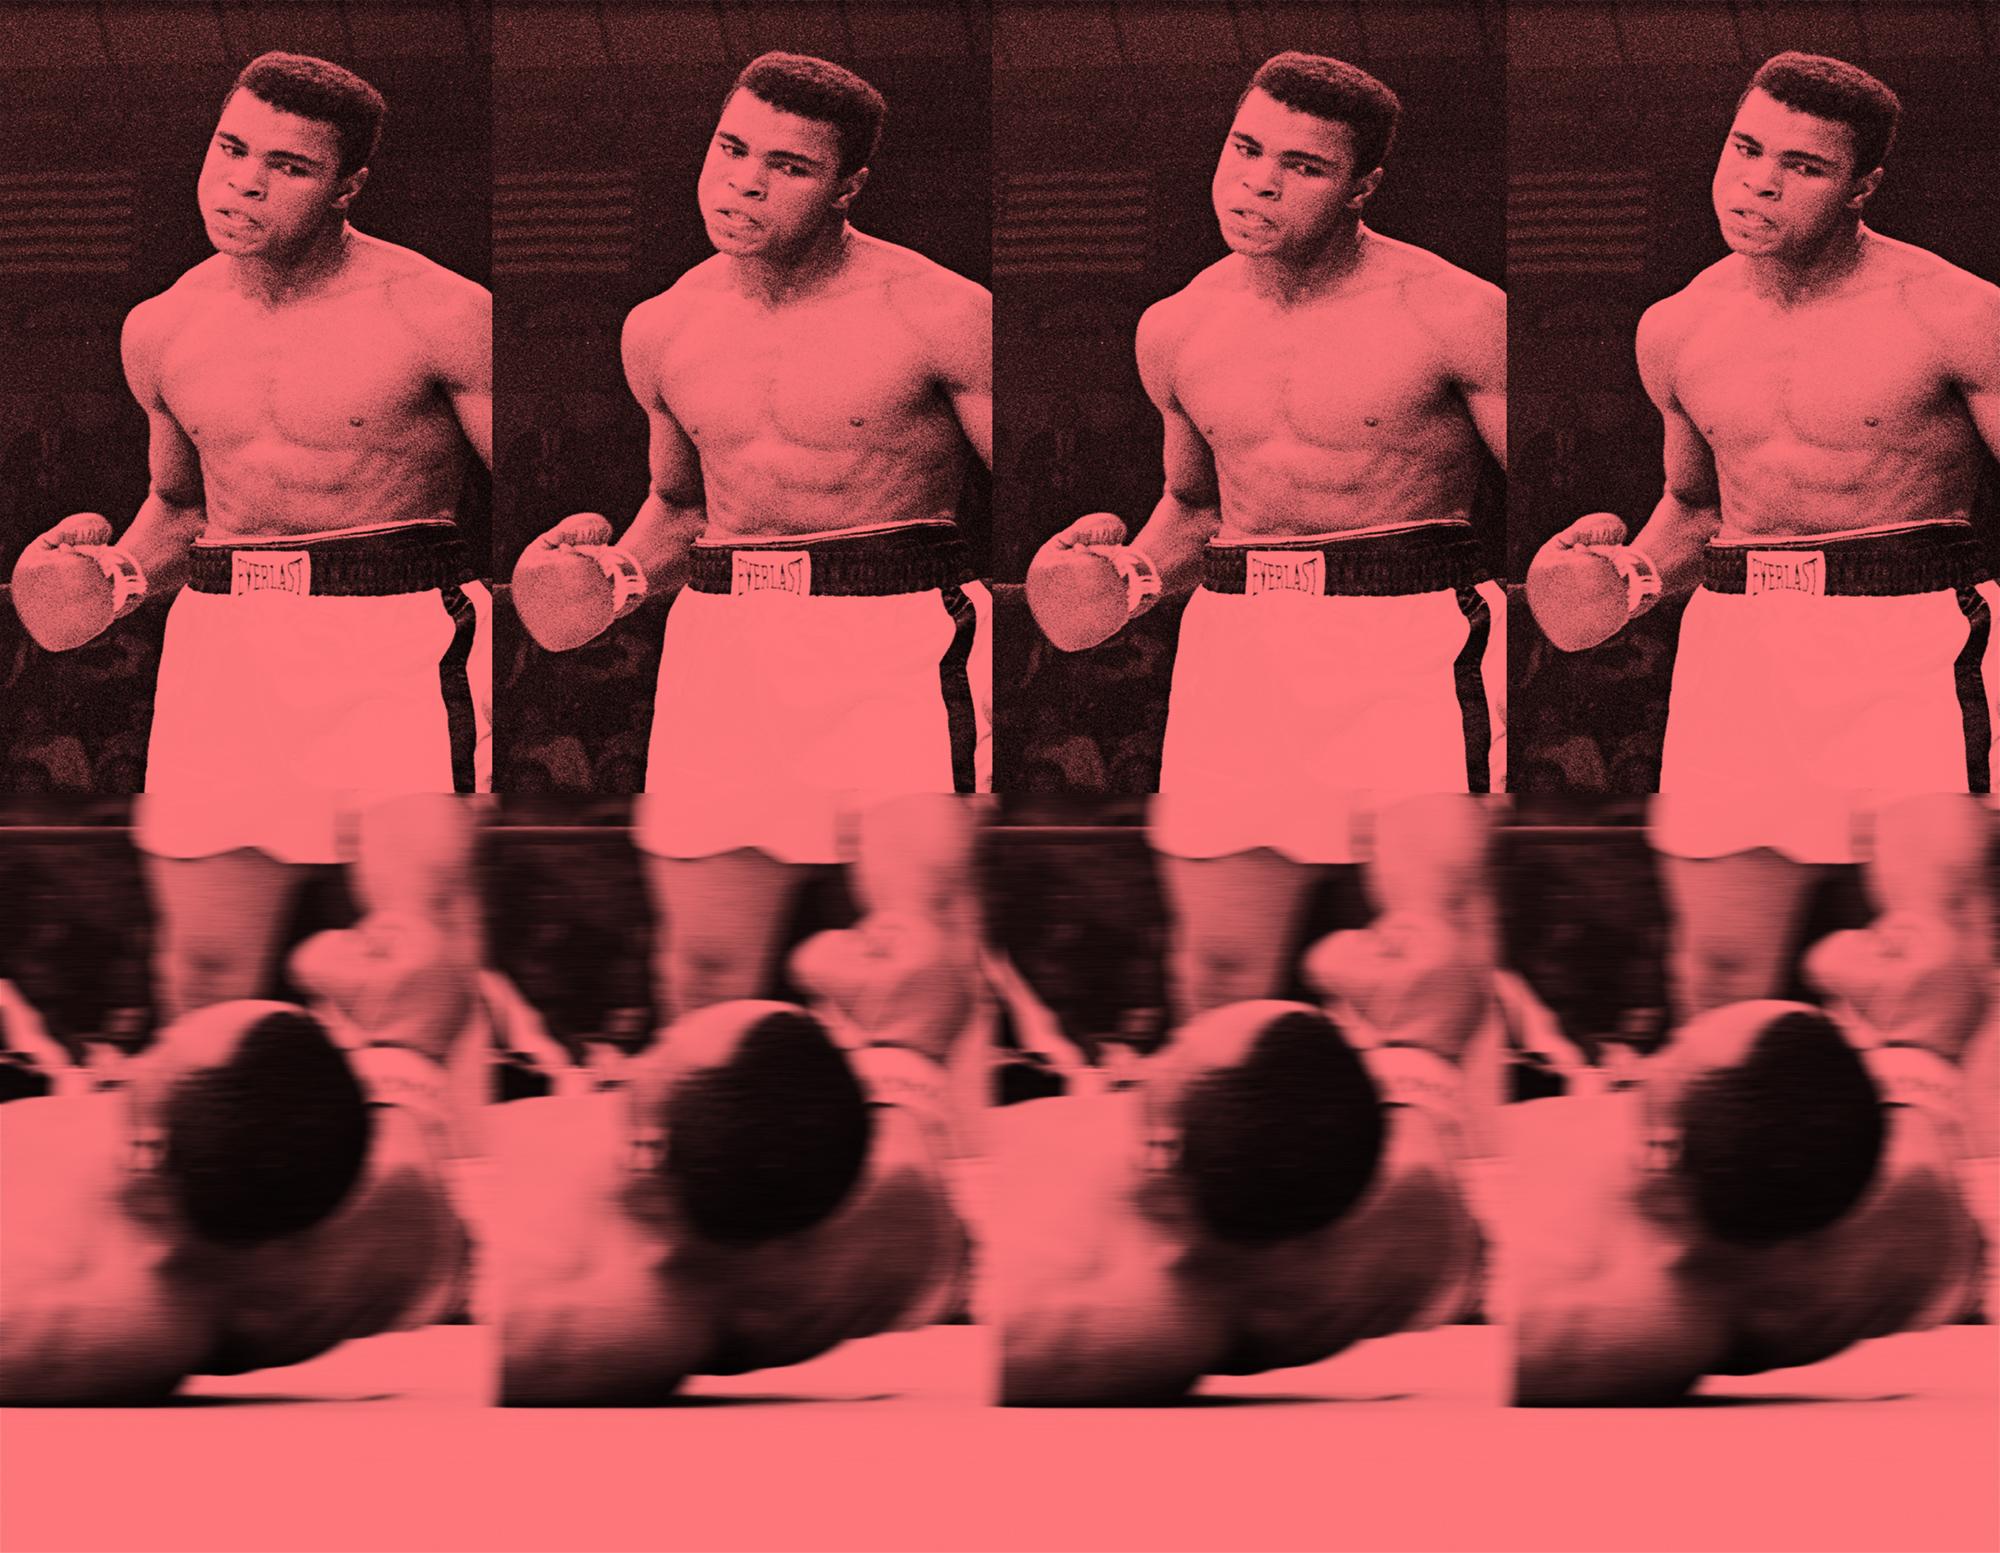 Unknown Color Photograph - Army Of Me II - Oversize signed limited edition - Pop Art - Muhammad Ali